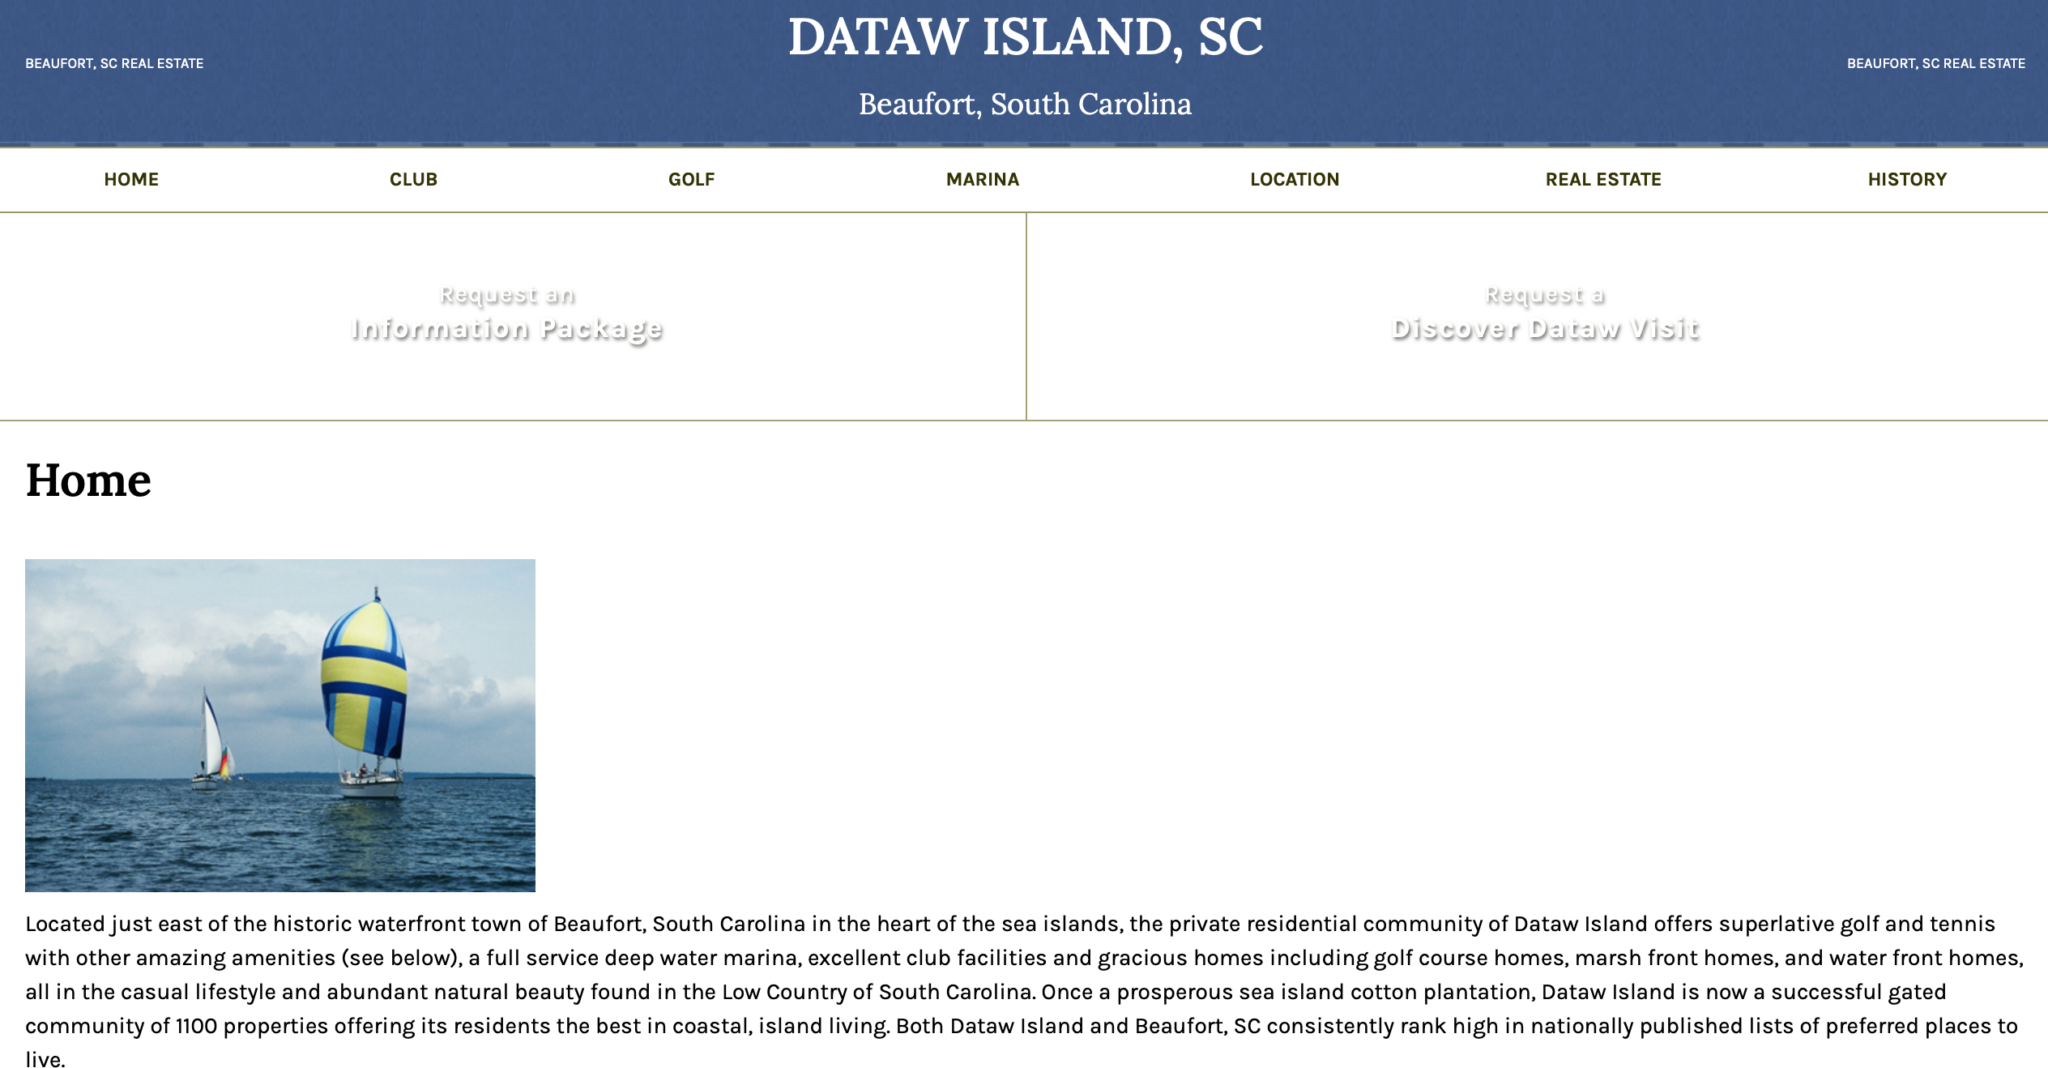 Discover Dataw Island, Before